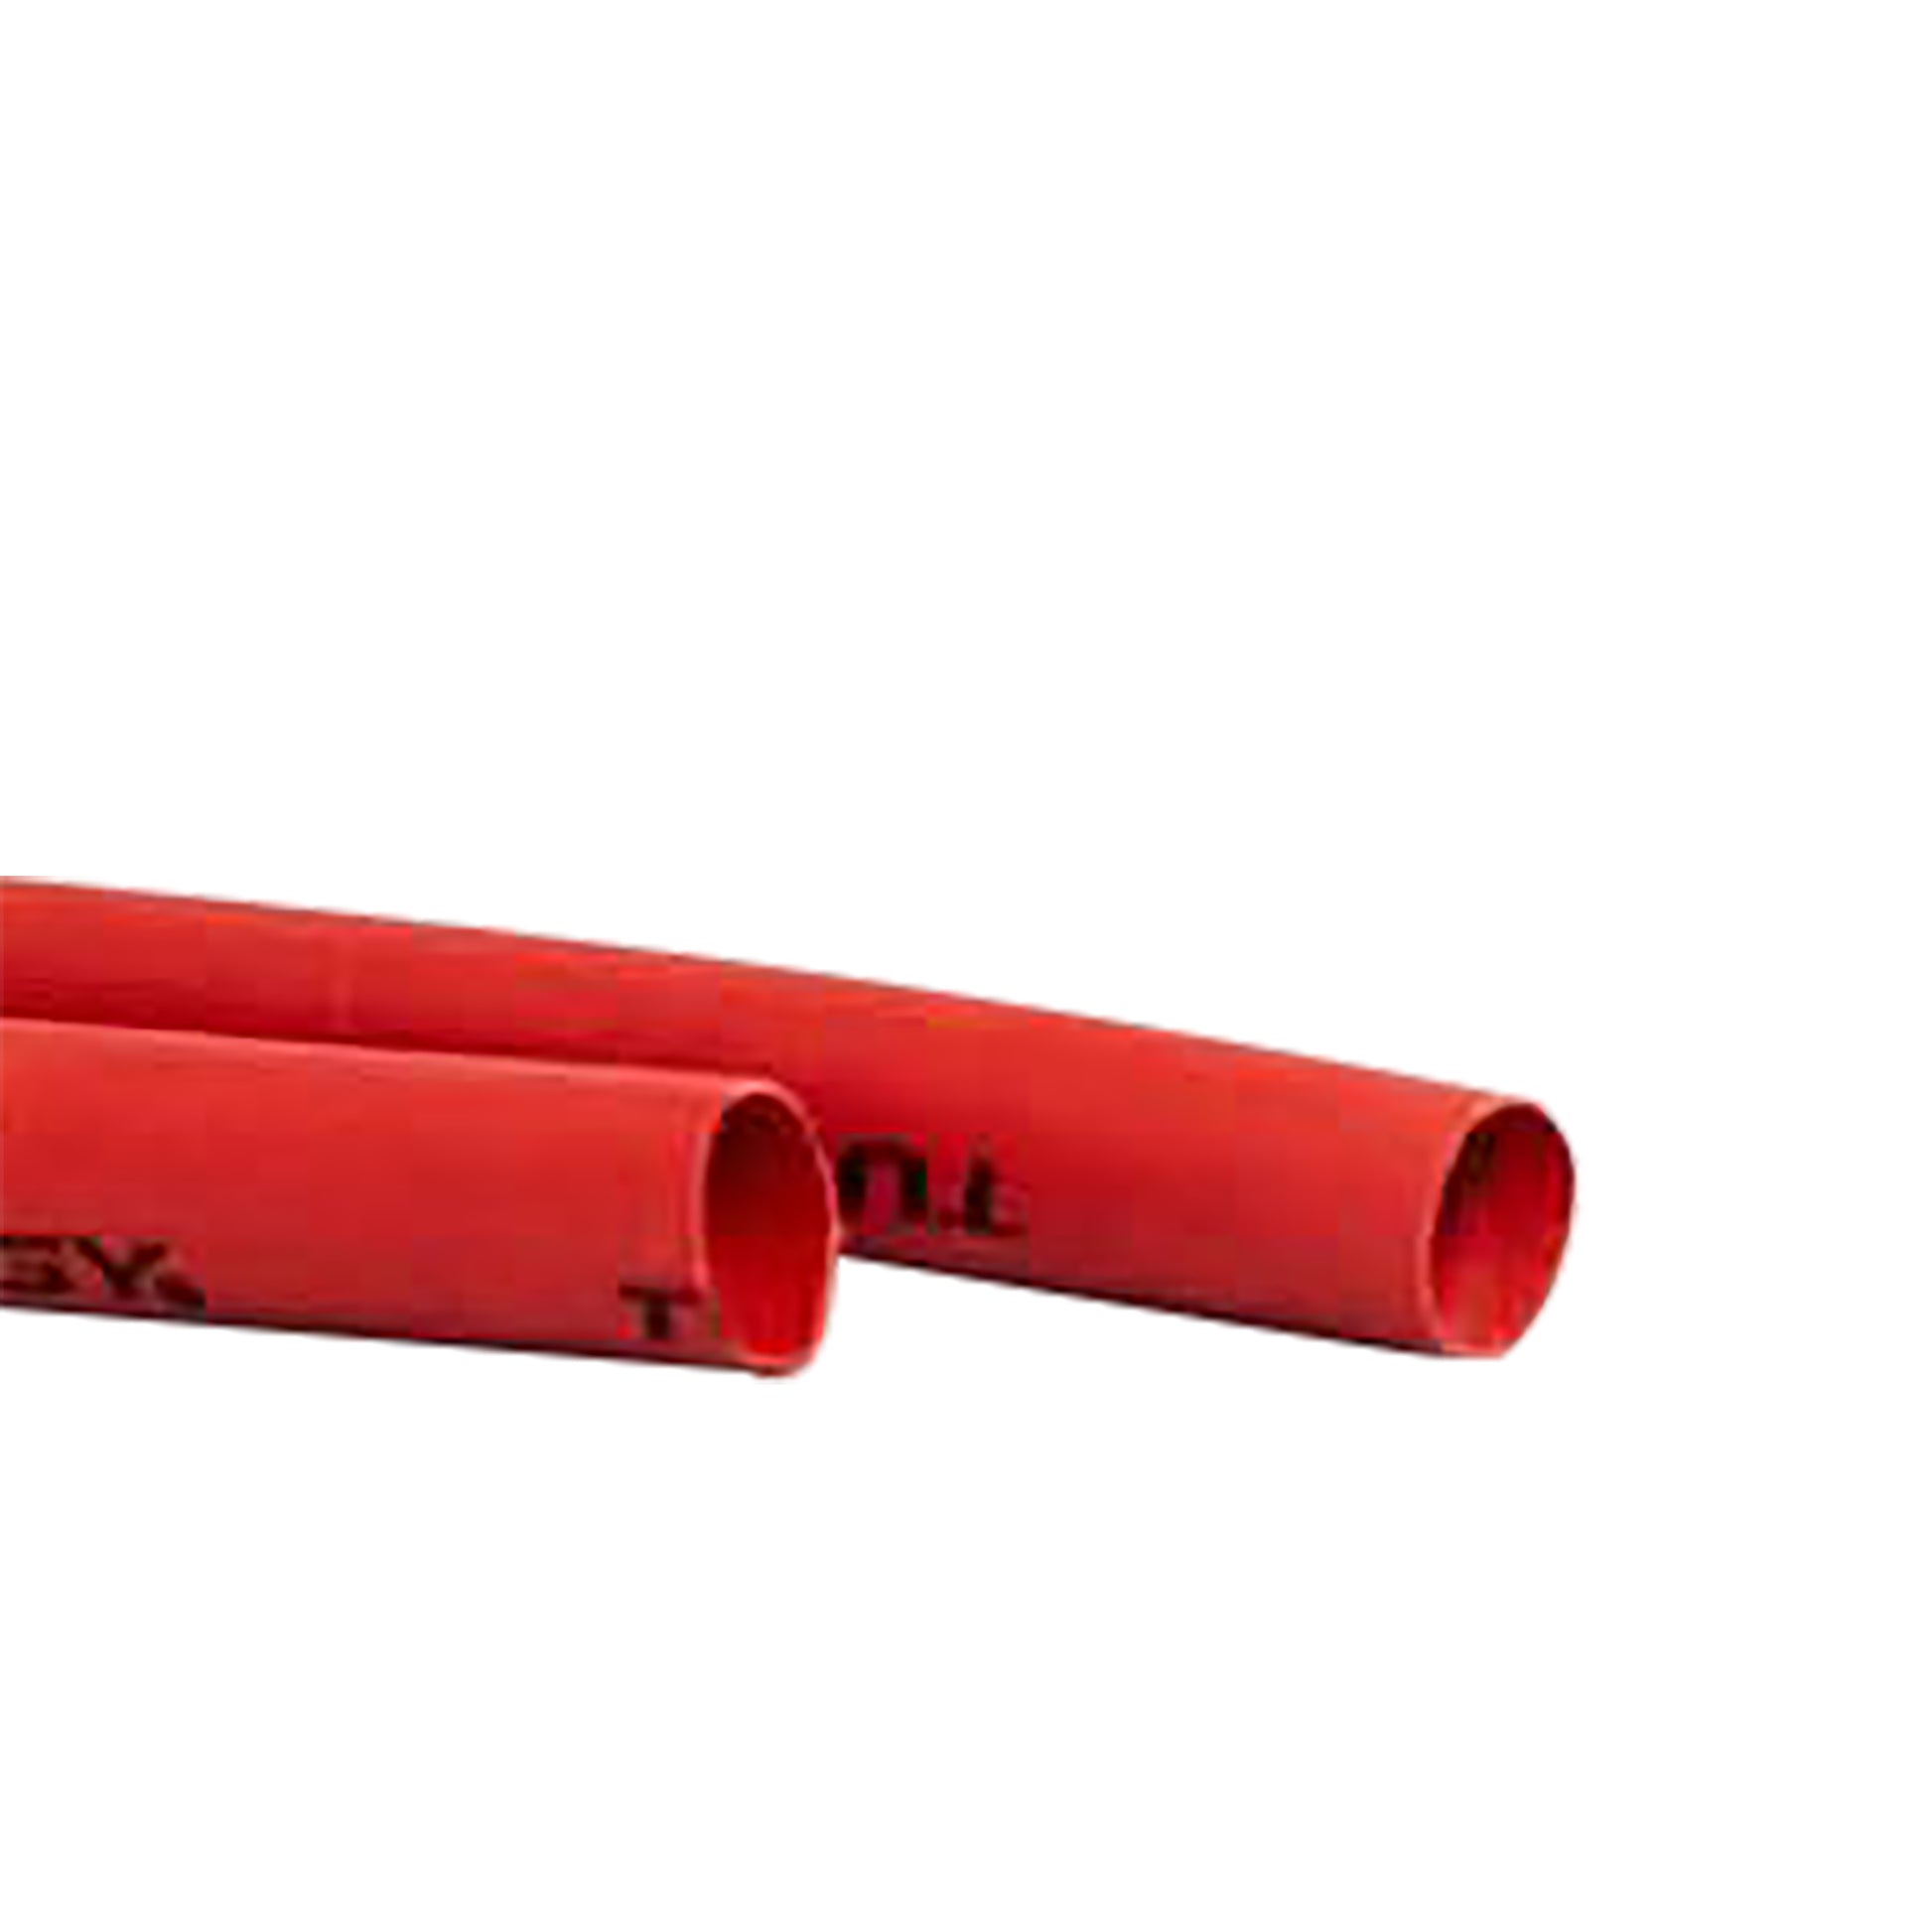 Flexible Thin Single Wall Non-Adhesive Heat Shrink Tubing 2:1 Red 3/16" ID - 48" Inch 4 Pack